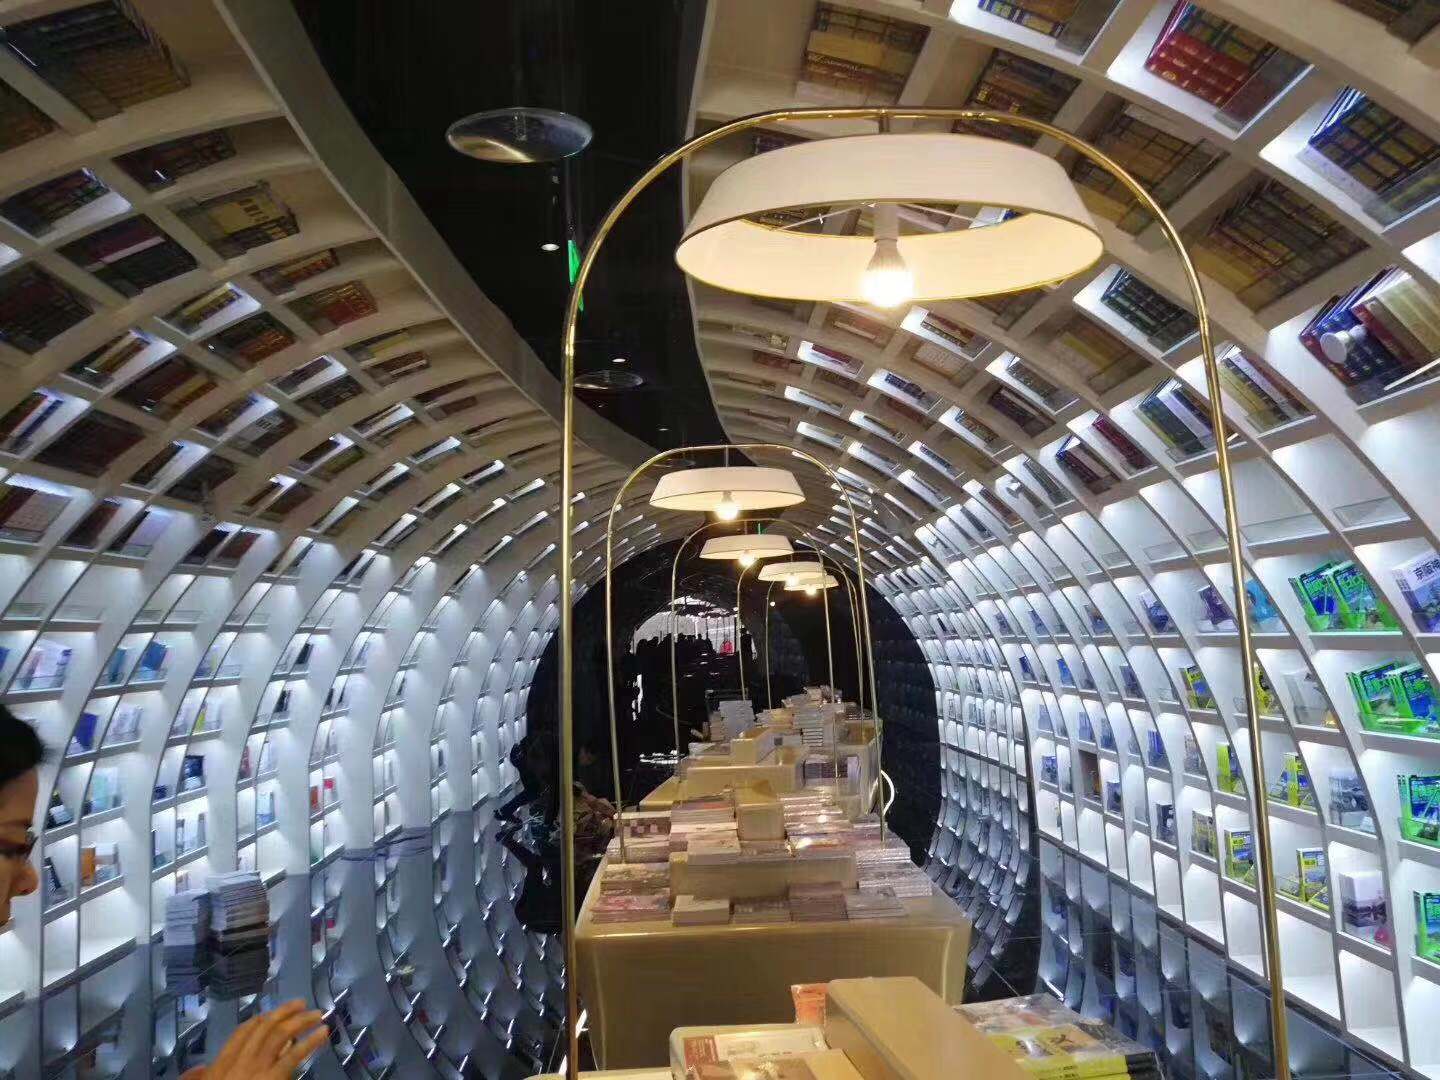 Splendid bookstore opens up in Guiyang, SW China's Guizhou province